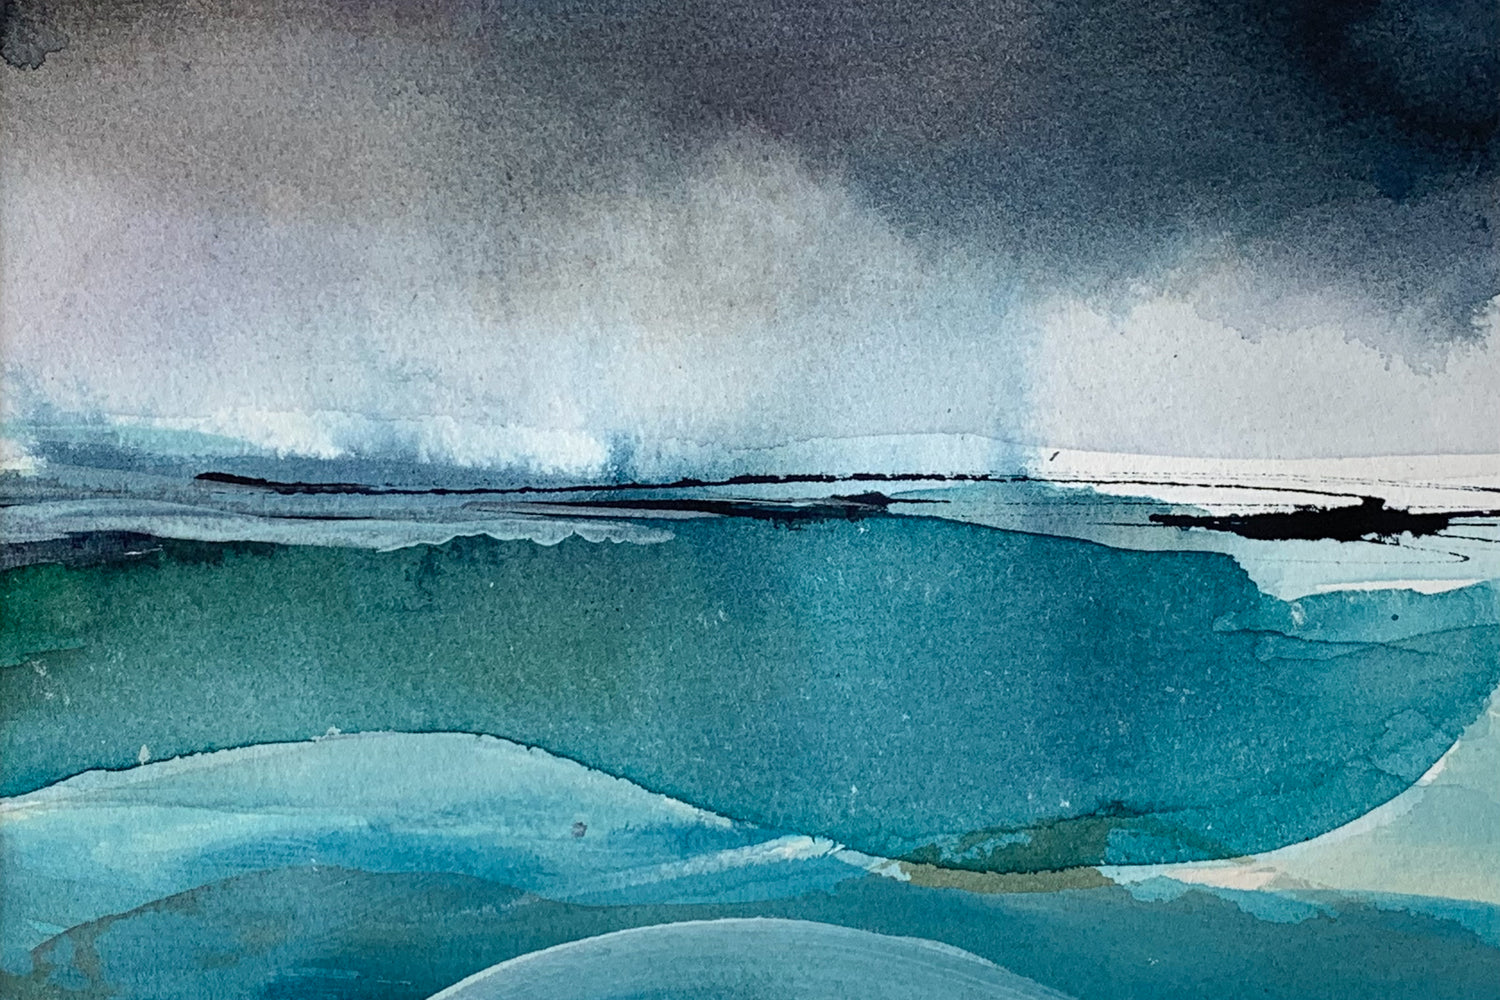 Stormy waters a painting with dark blue sky and turquoise waves.